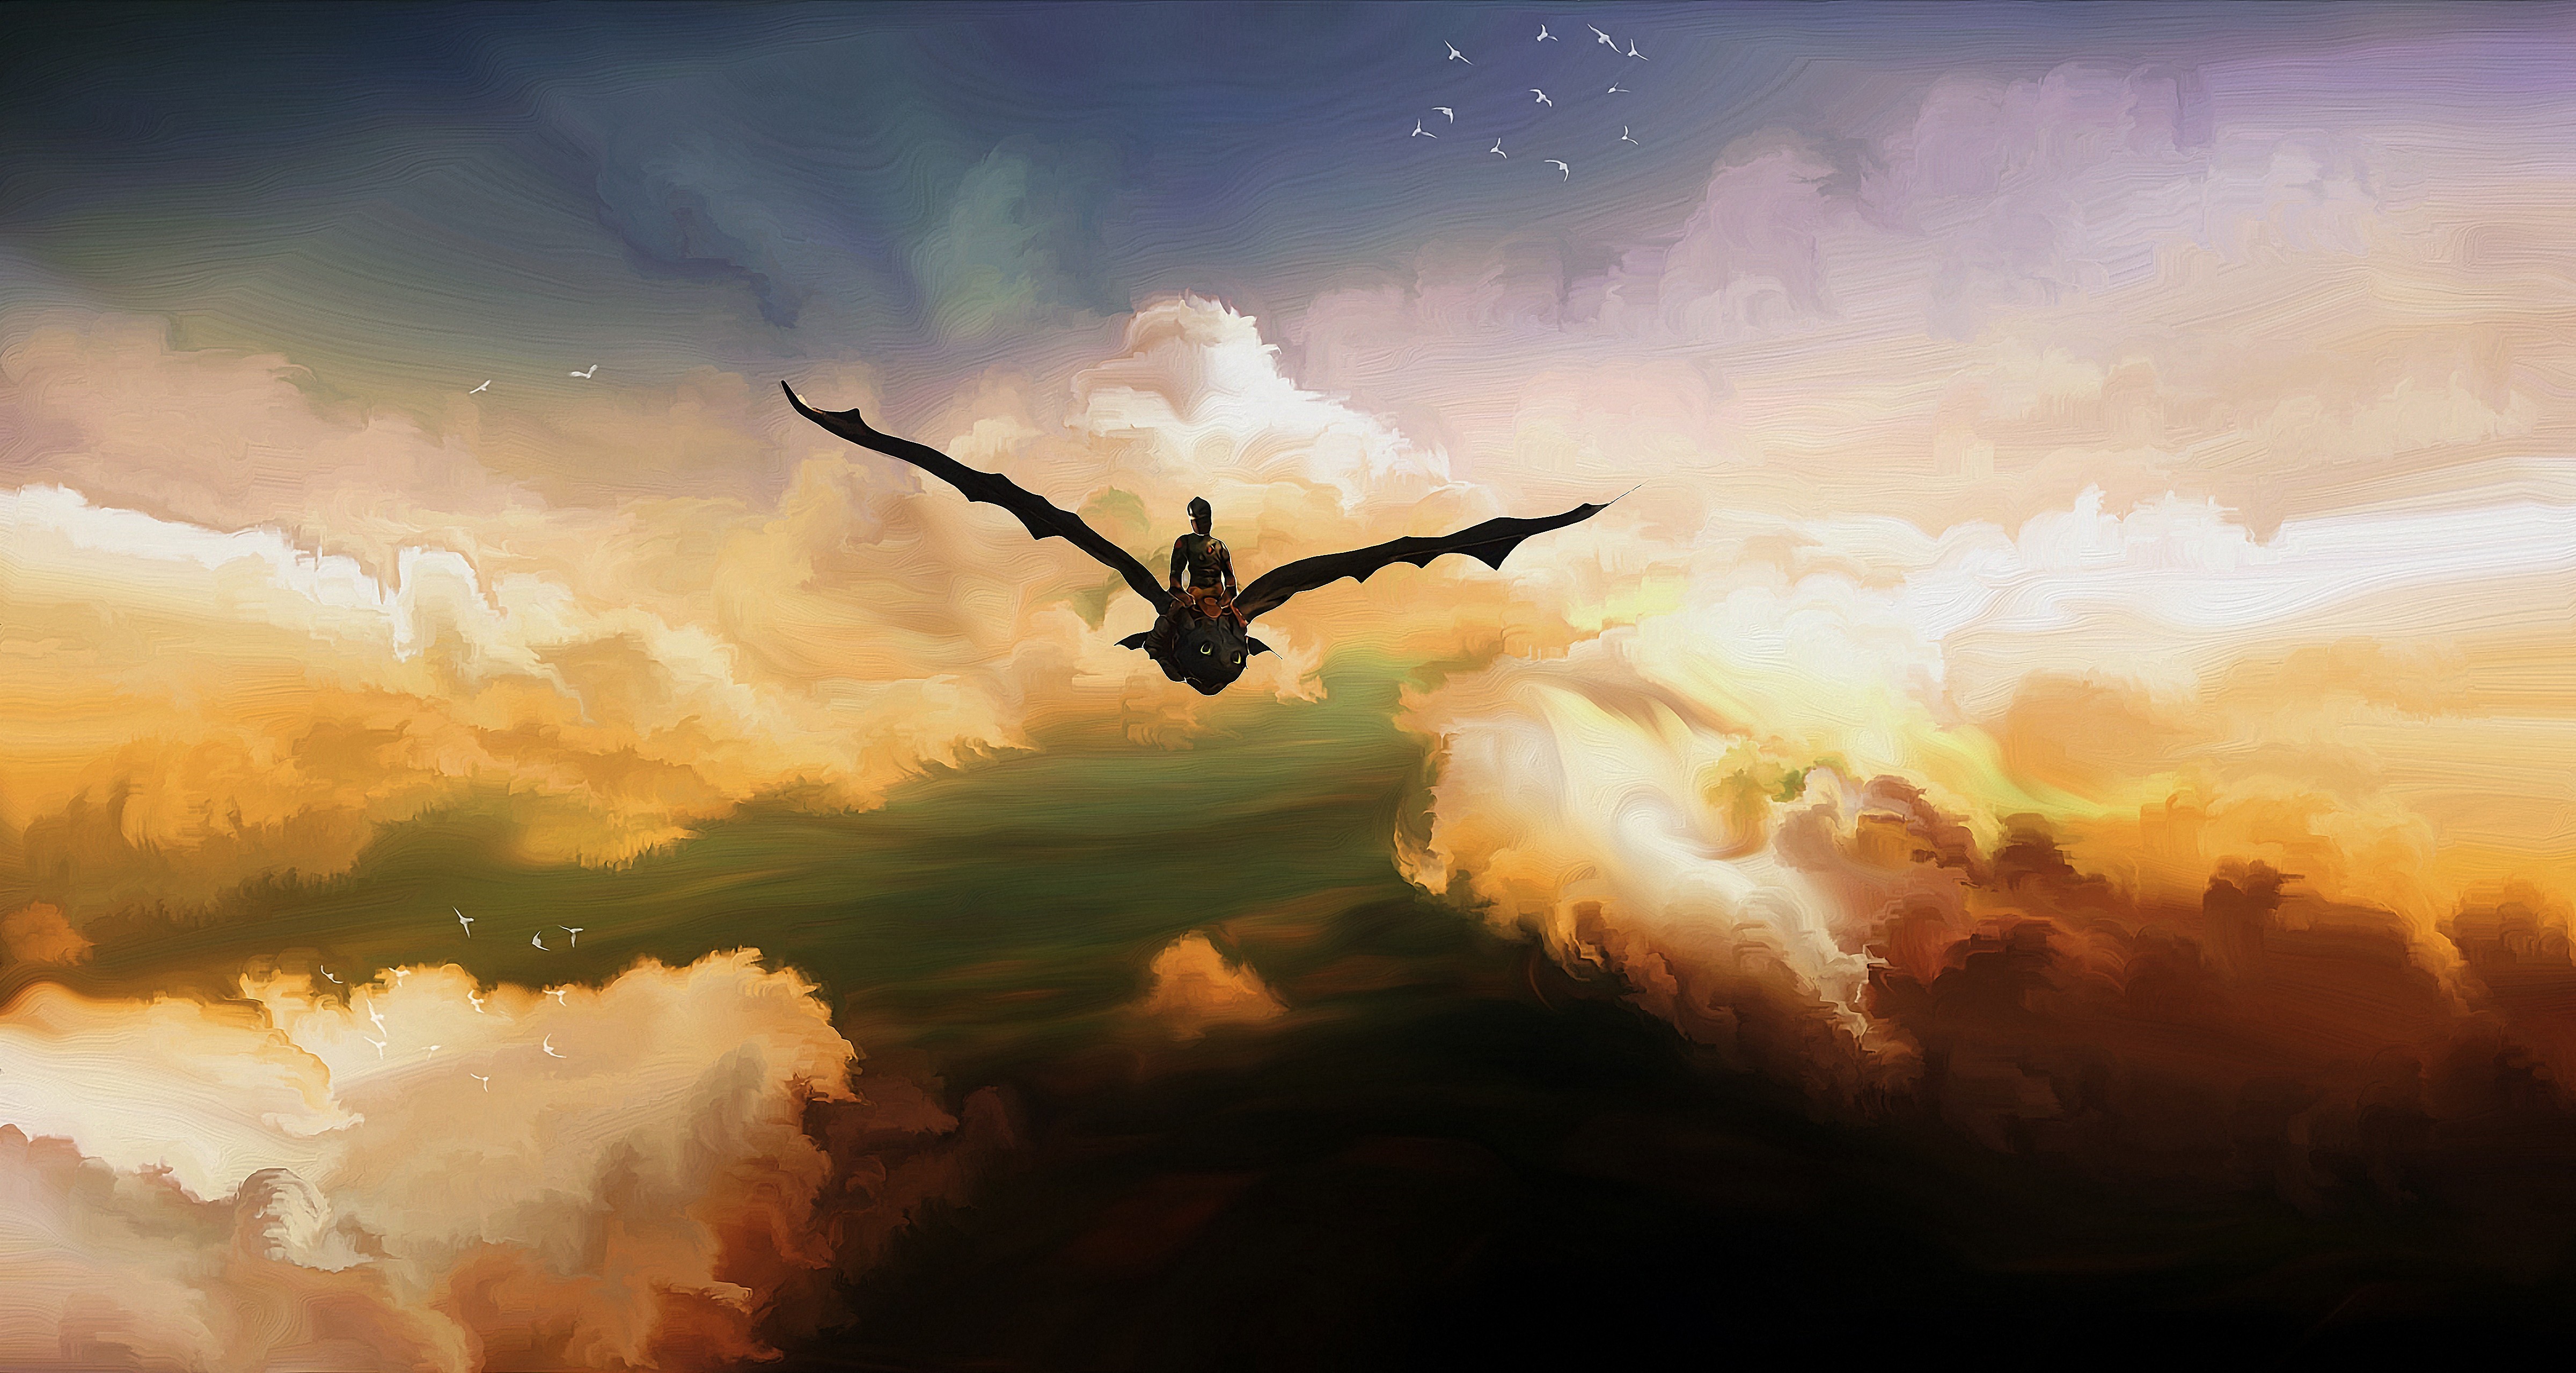 concept Art, Landscape, Animated Movies, Dragon, How To Train Your Dragon 2 Wallpaper